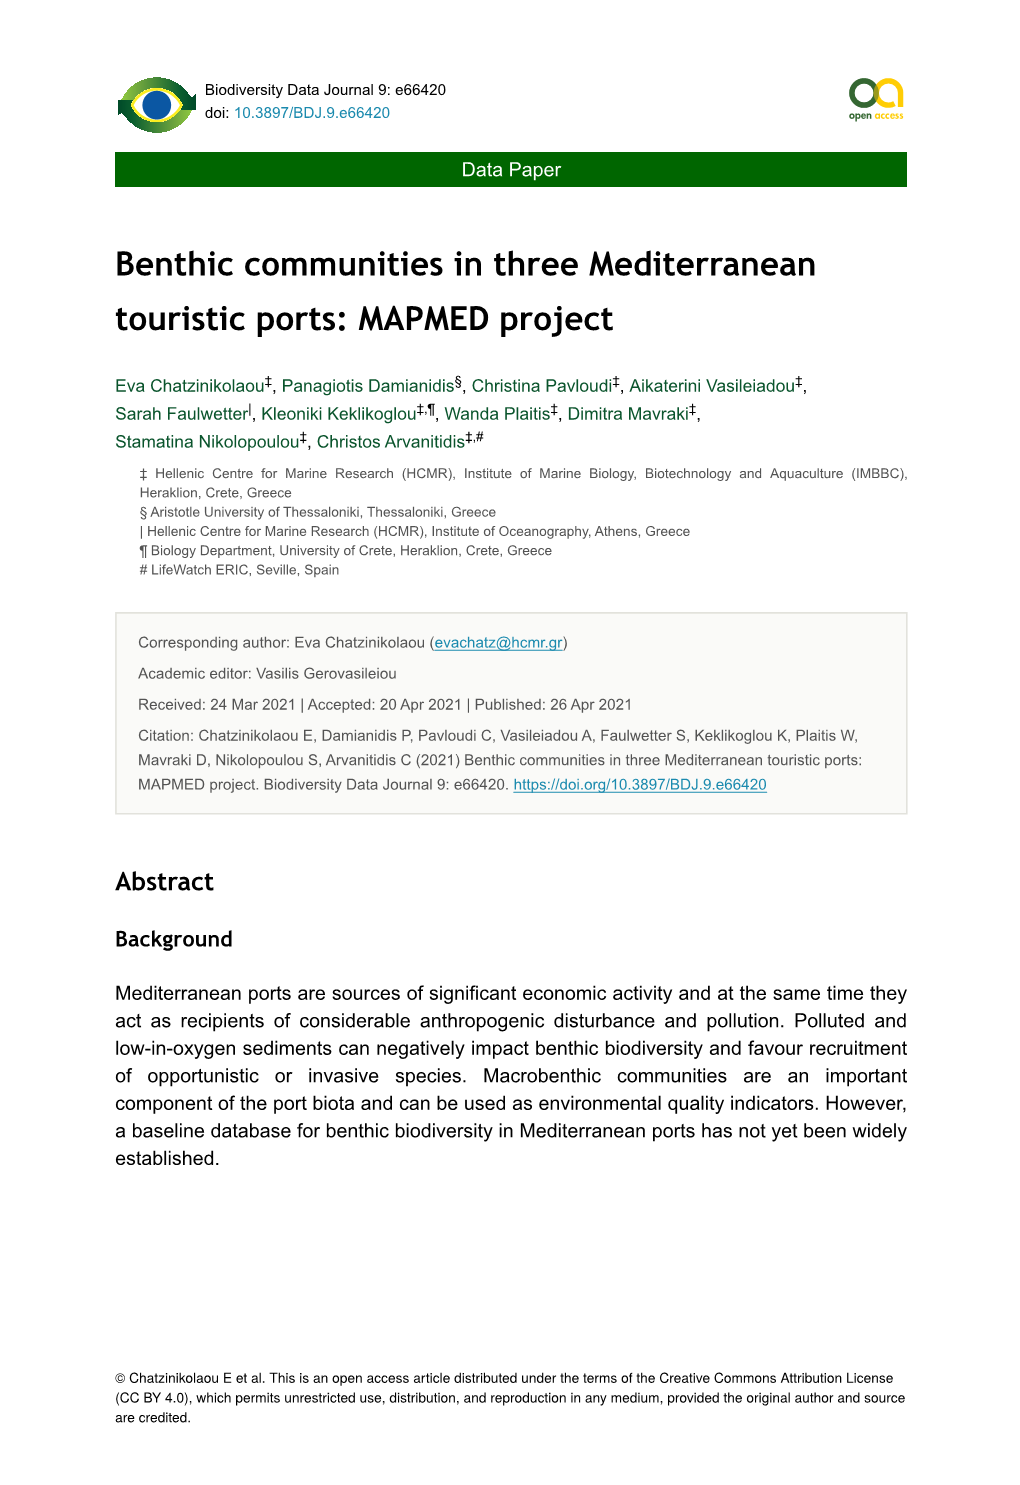 Benthic Communities in Three Mediterranean Touristic Ports: MAPMED Project